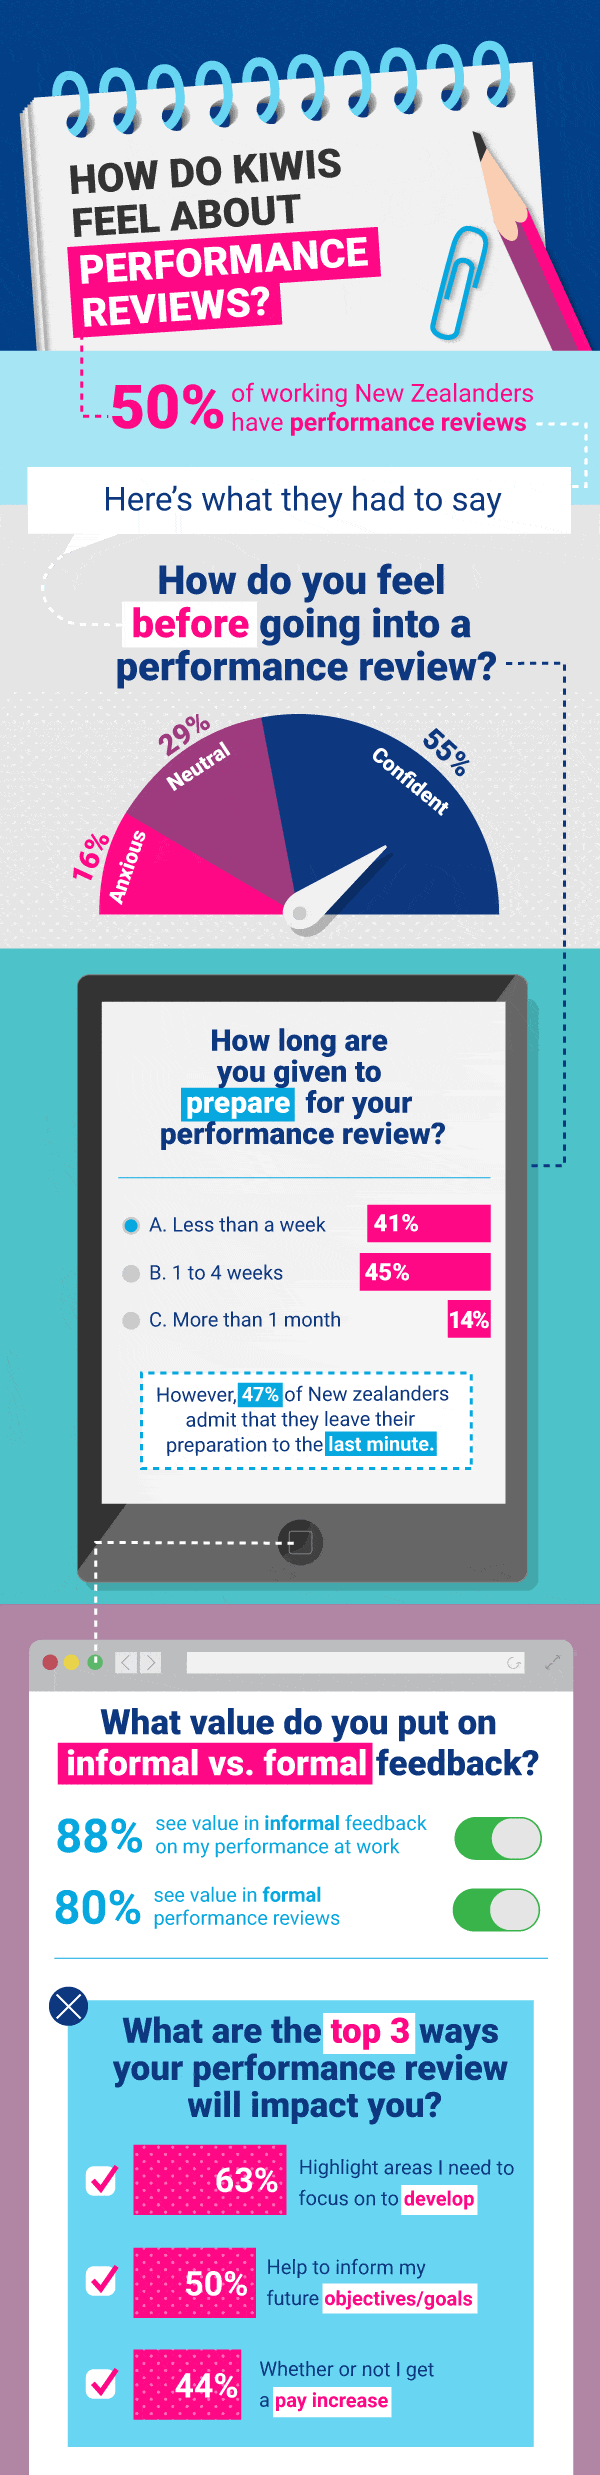 How do Kiwis feel about Performance Reviews?